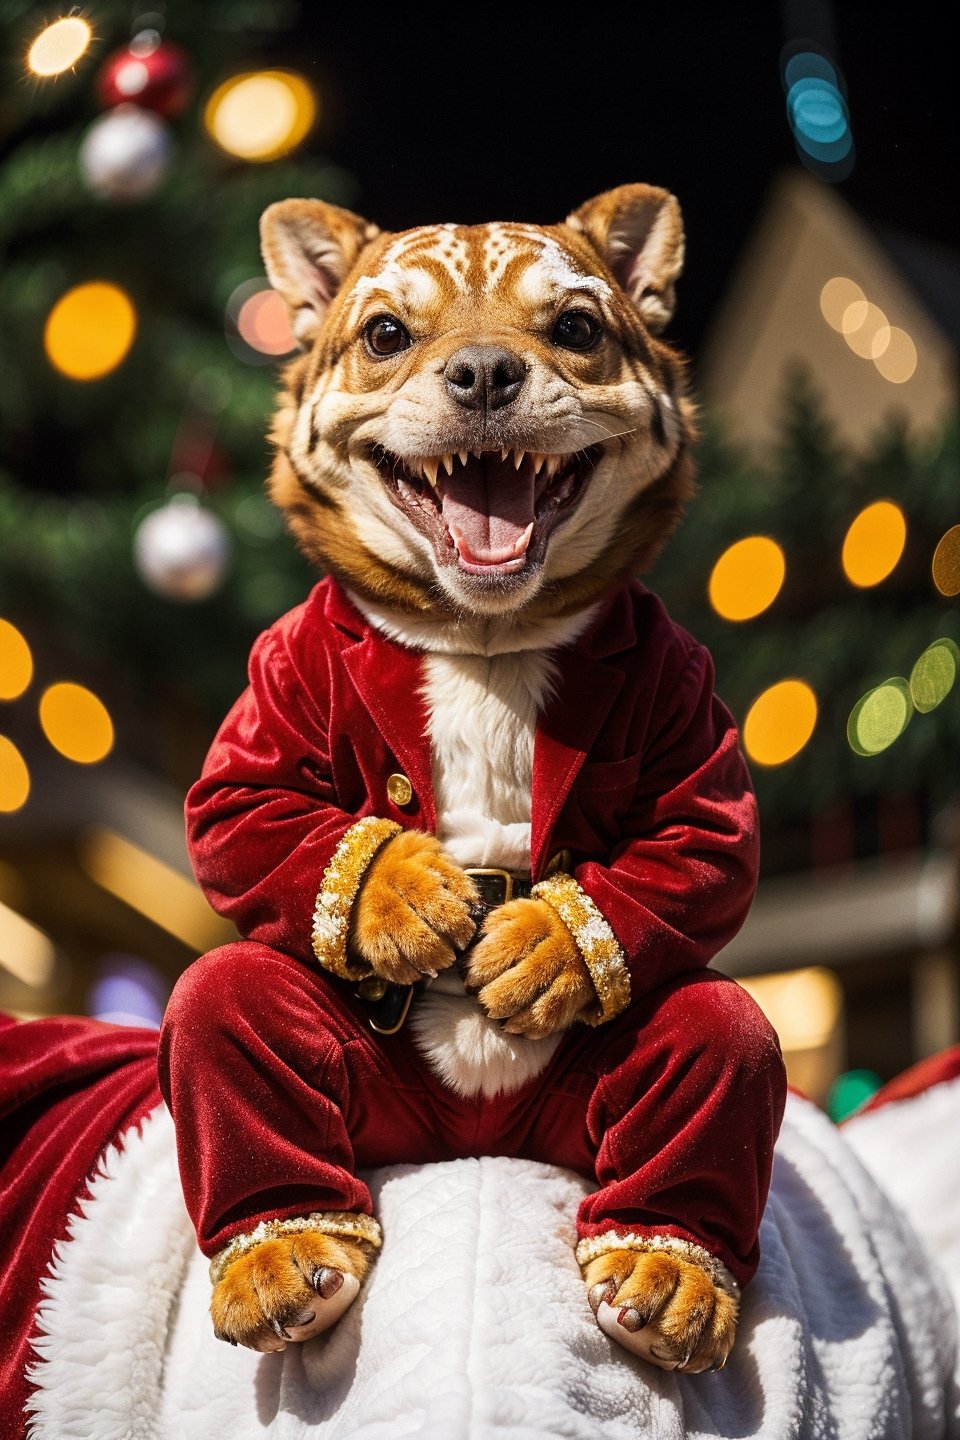 masterpiece, UHD, photorealistic, adorable pet, Santa's cute pet, unexpected pet, cute baby T-Rex, vibrant orange skin, large round eyes, smiling happily, sitting on Santa's lap, surrounded by a bustling crowd, amazed children, delighted expressions, joyful parents, twinkling Christmas lights, festive decorations, Santa's red and white suit, snowy background, winter wonderland, cheerful atmosphere, mid-shot, dynamic pose, little dino raising its tiny arms, excitement in the air, laughter and awe, trending on artstation, best quality, CG, cute and lovable, textured scales, playful expression, memorable holiday moment